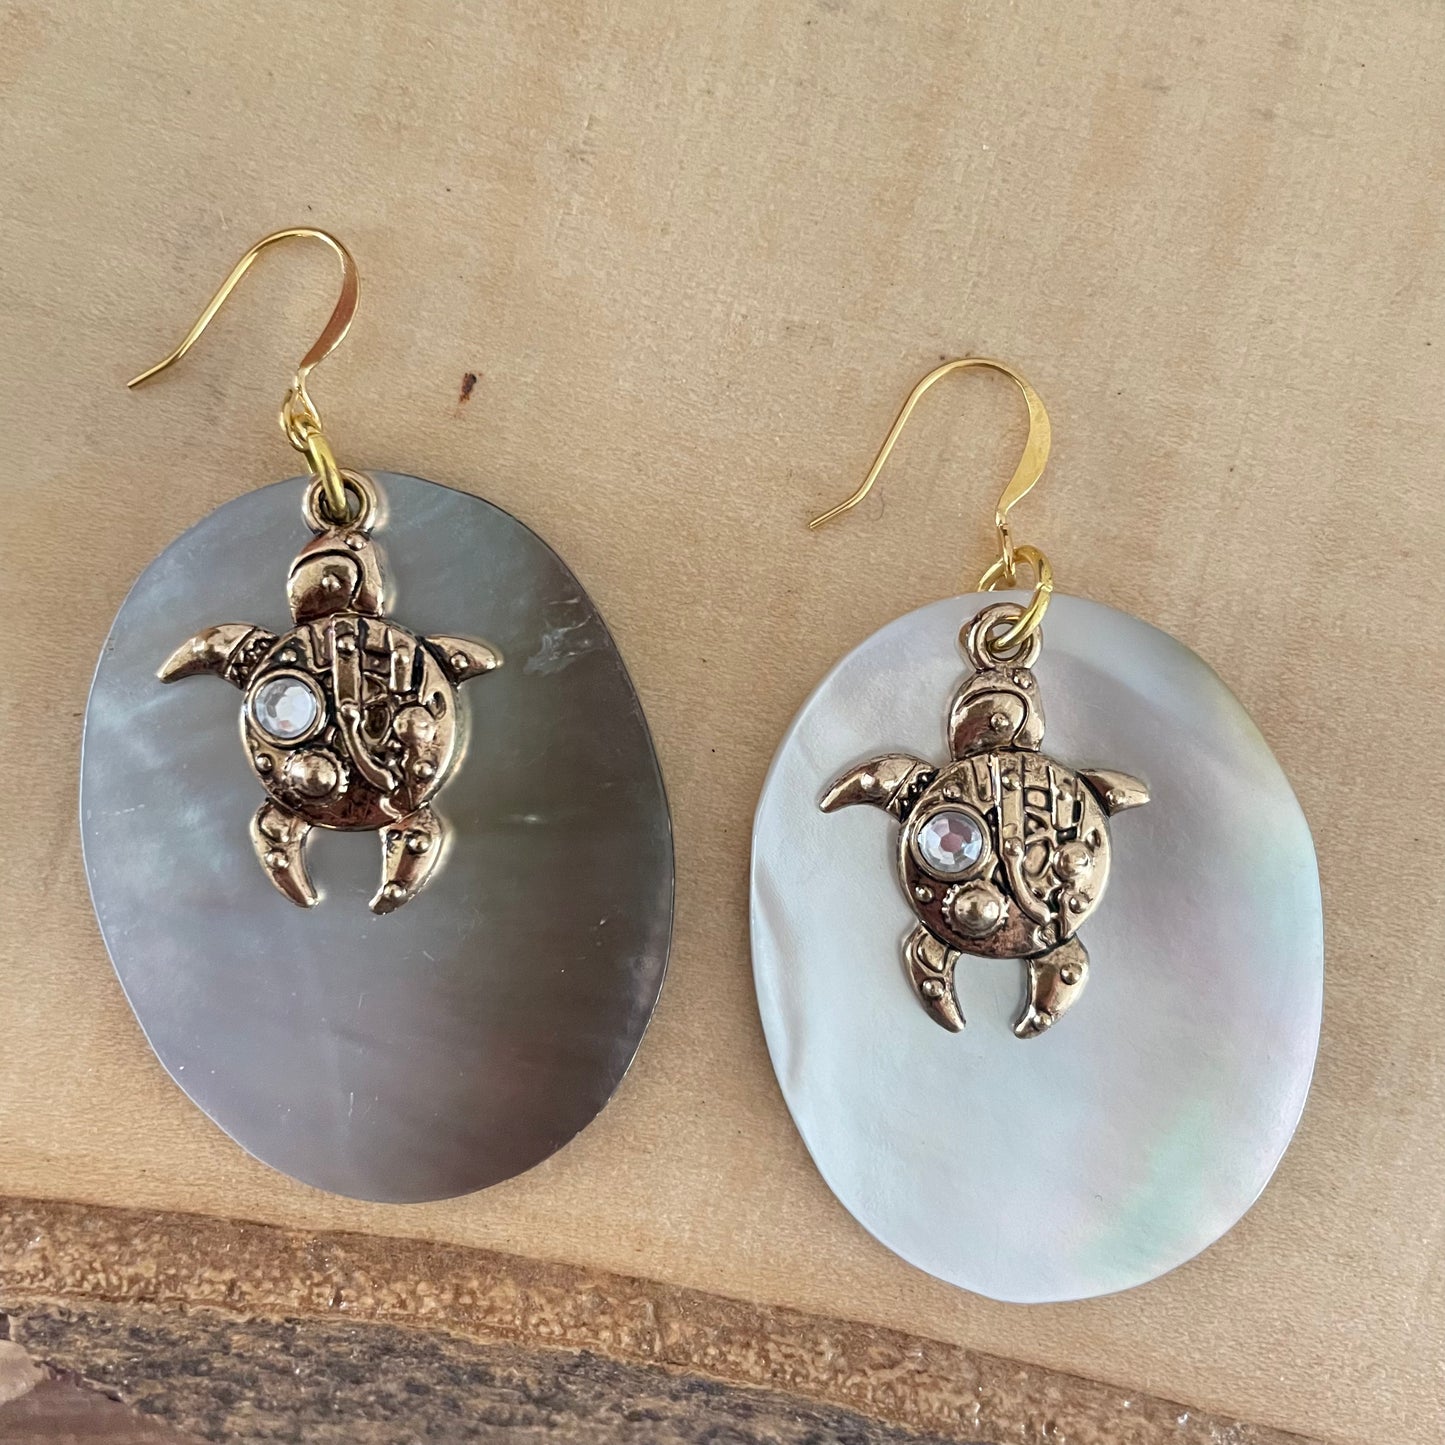 Iridescent Oval Shell & Steampunk Turtle Earrings Handmade Geometric Large Statement Ocean Sea Life Punk Mother of Pearl